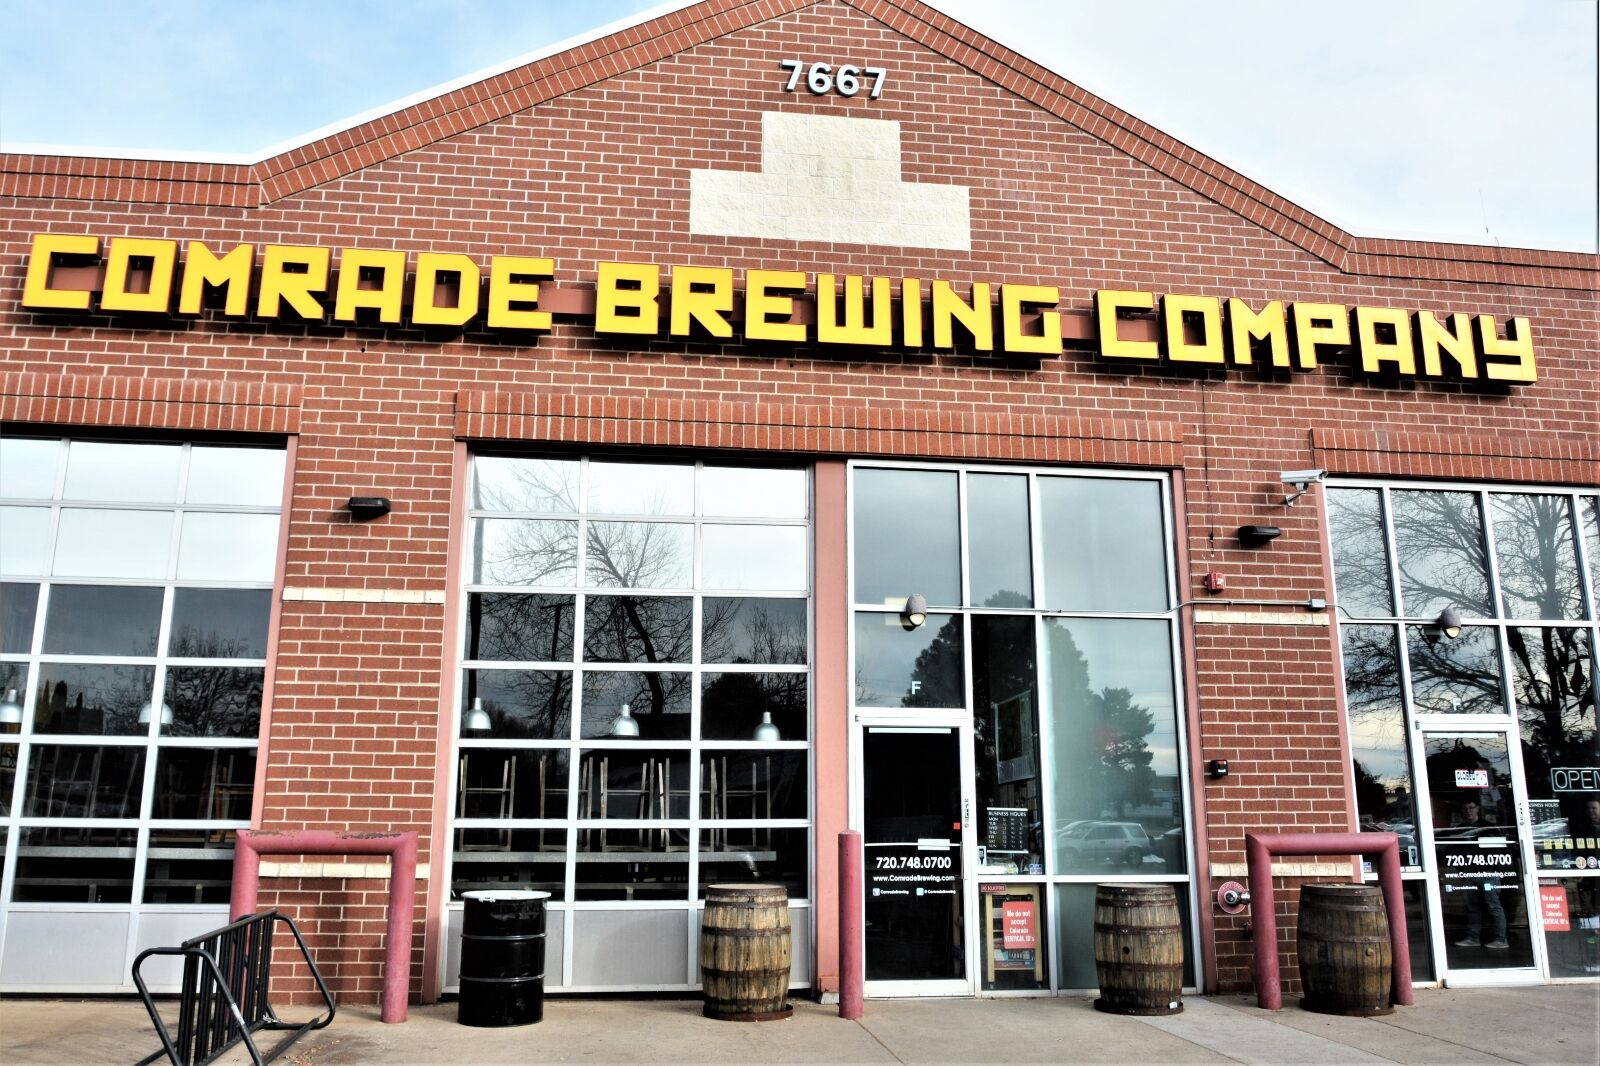 Comrade brewing company one of the best things to do in Denver